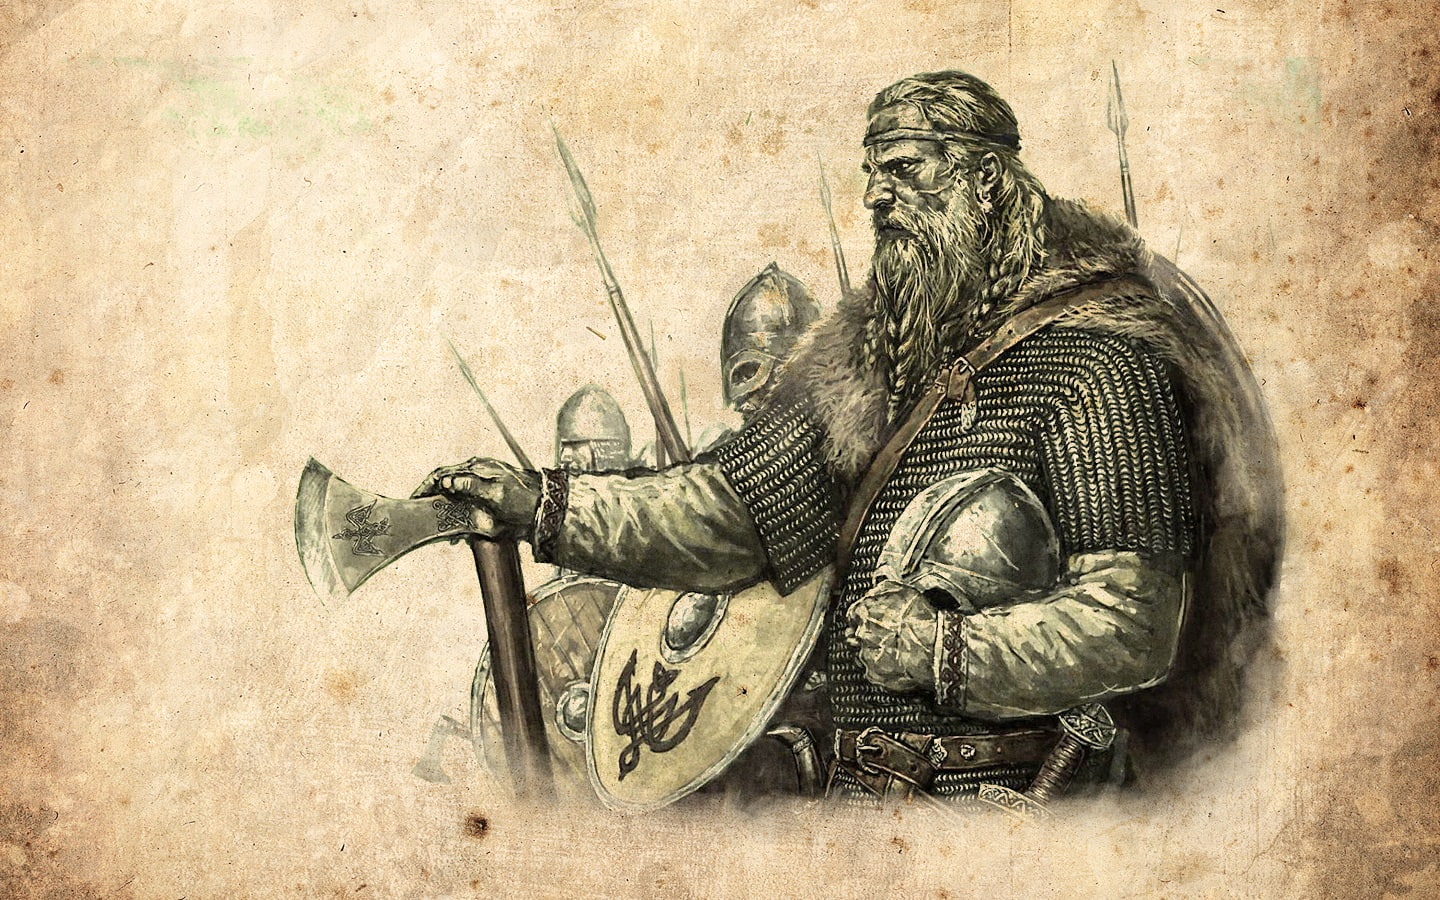 Axe, shield, Vikings, Mount and Blade, video games, artwork